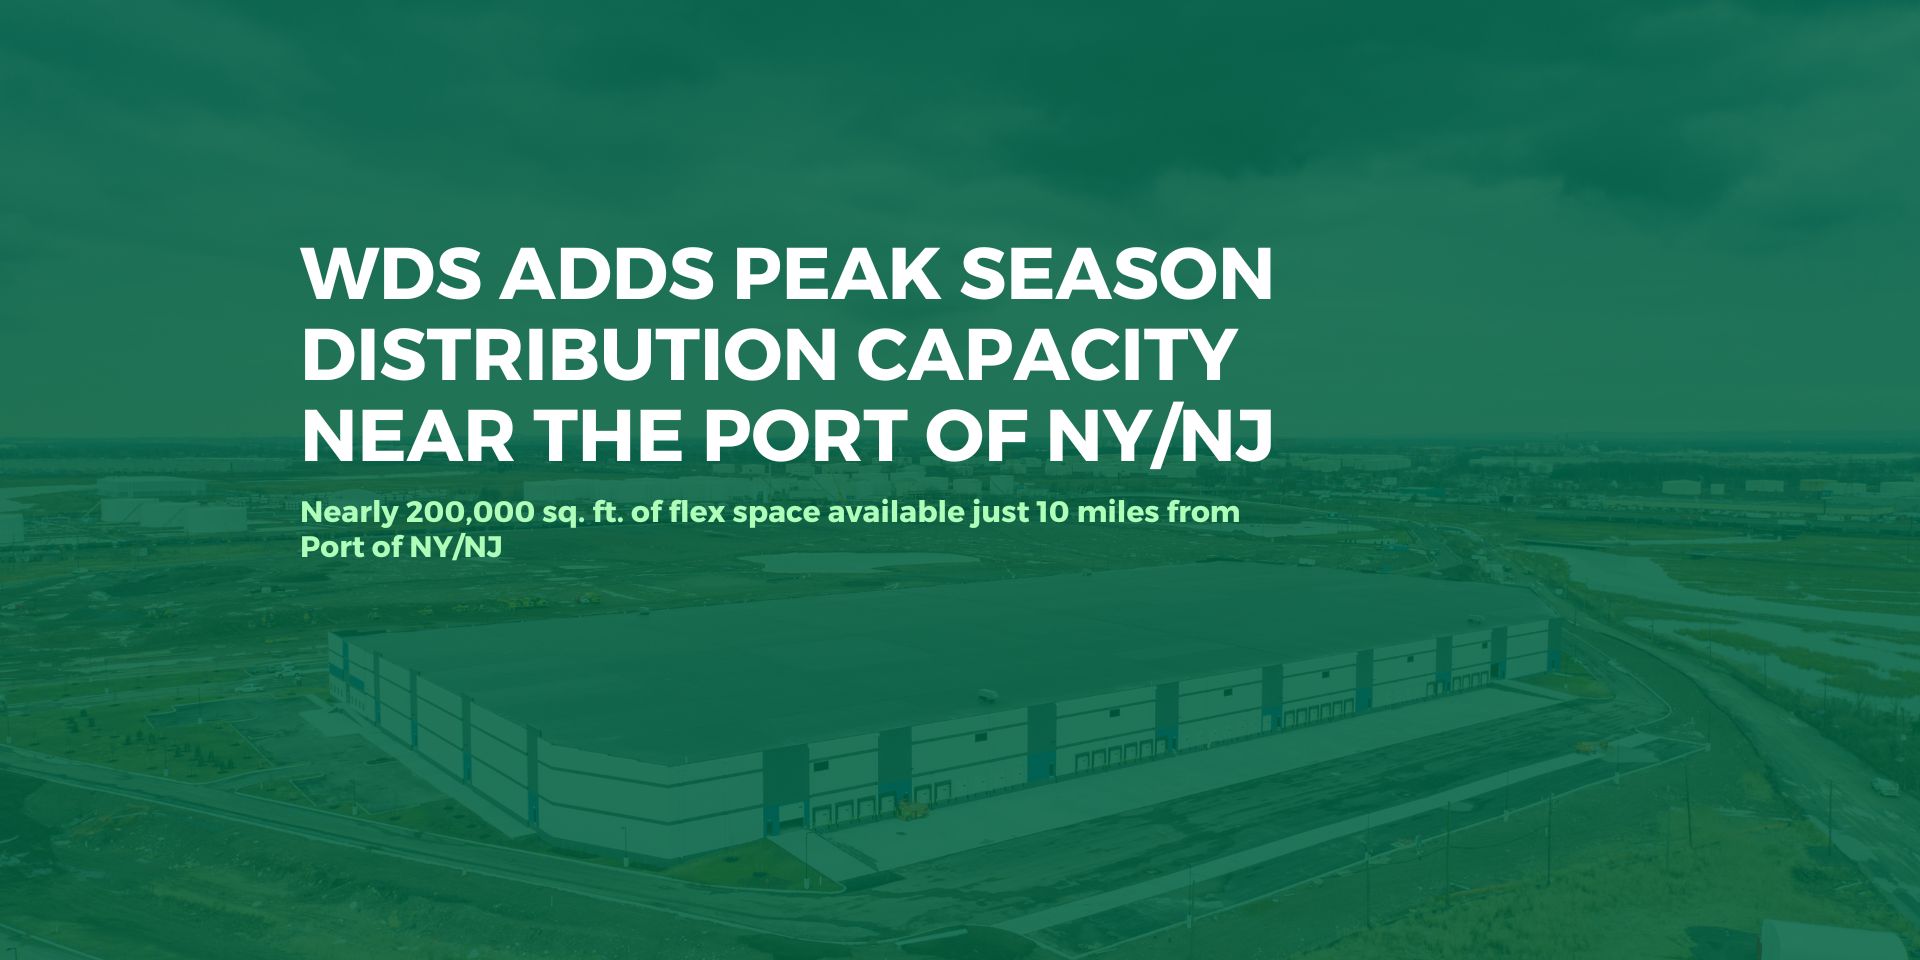 WDS ADDS PEAK SEASON DISTRIBUTION CAPACITY Near the Port of NY/NJ - Nearly 200,000 sq. ft. of flex space available just 10 miles from Port of NY/NJ